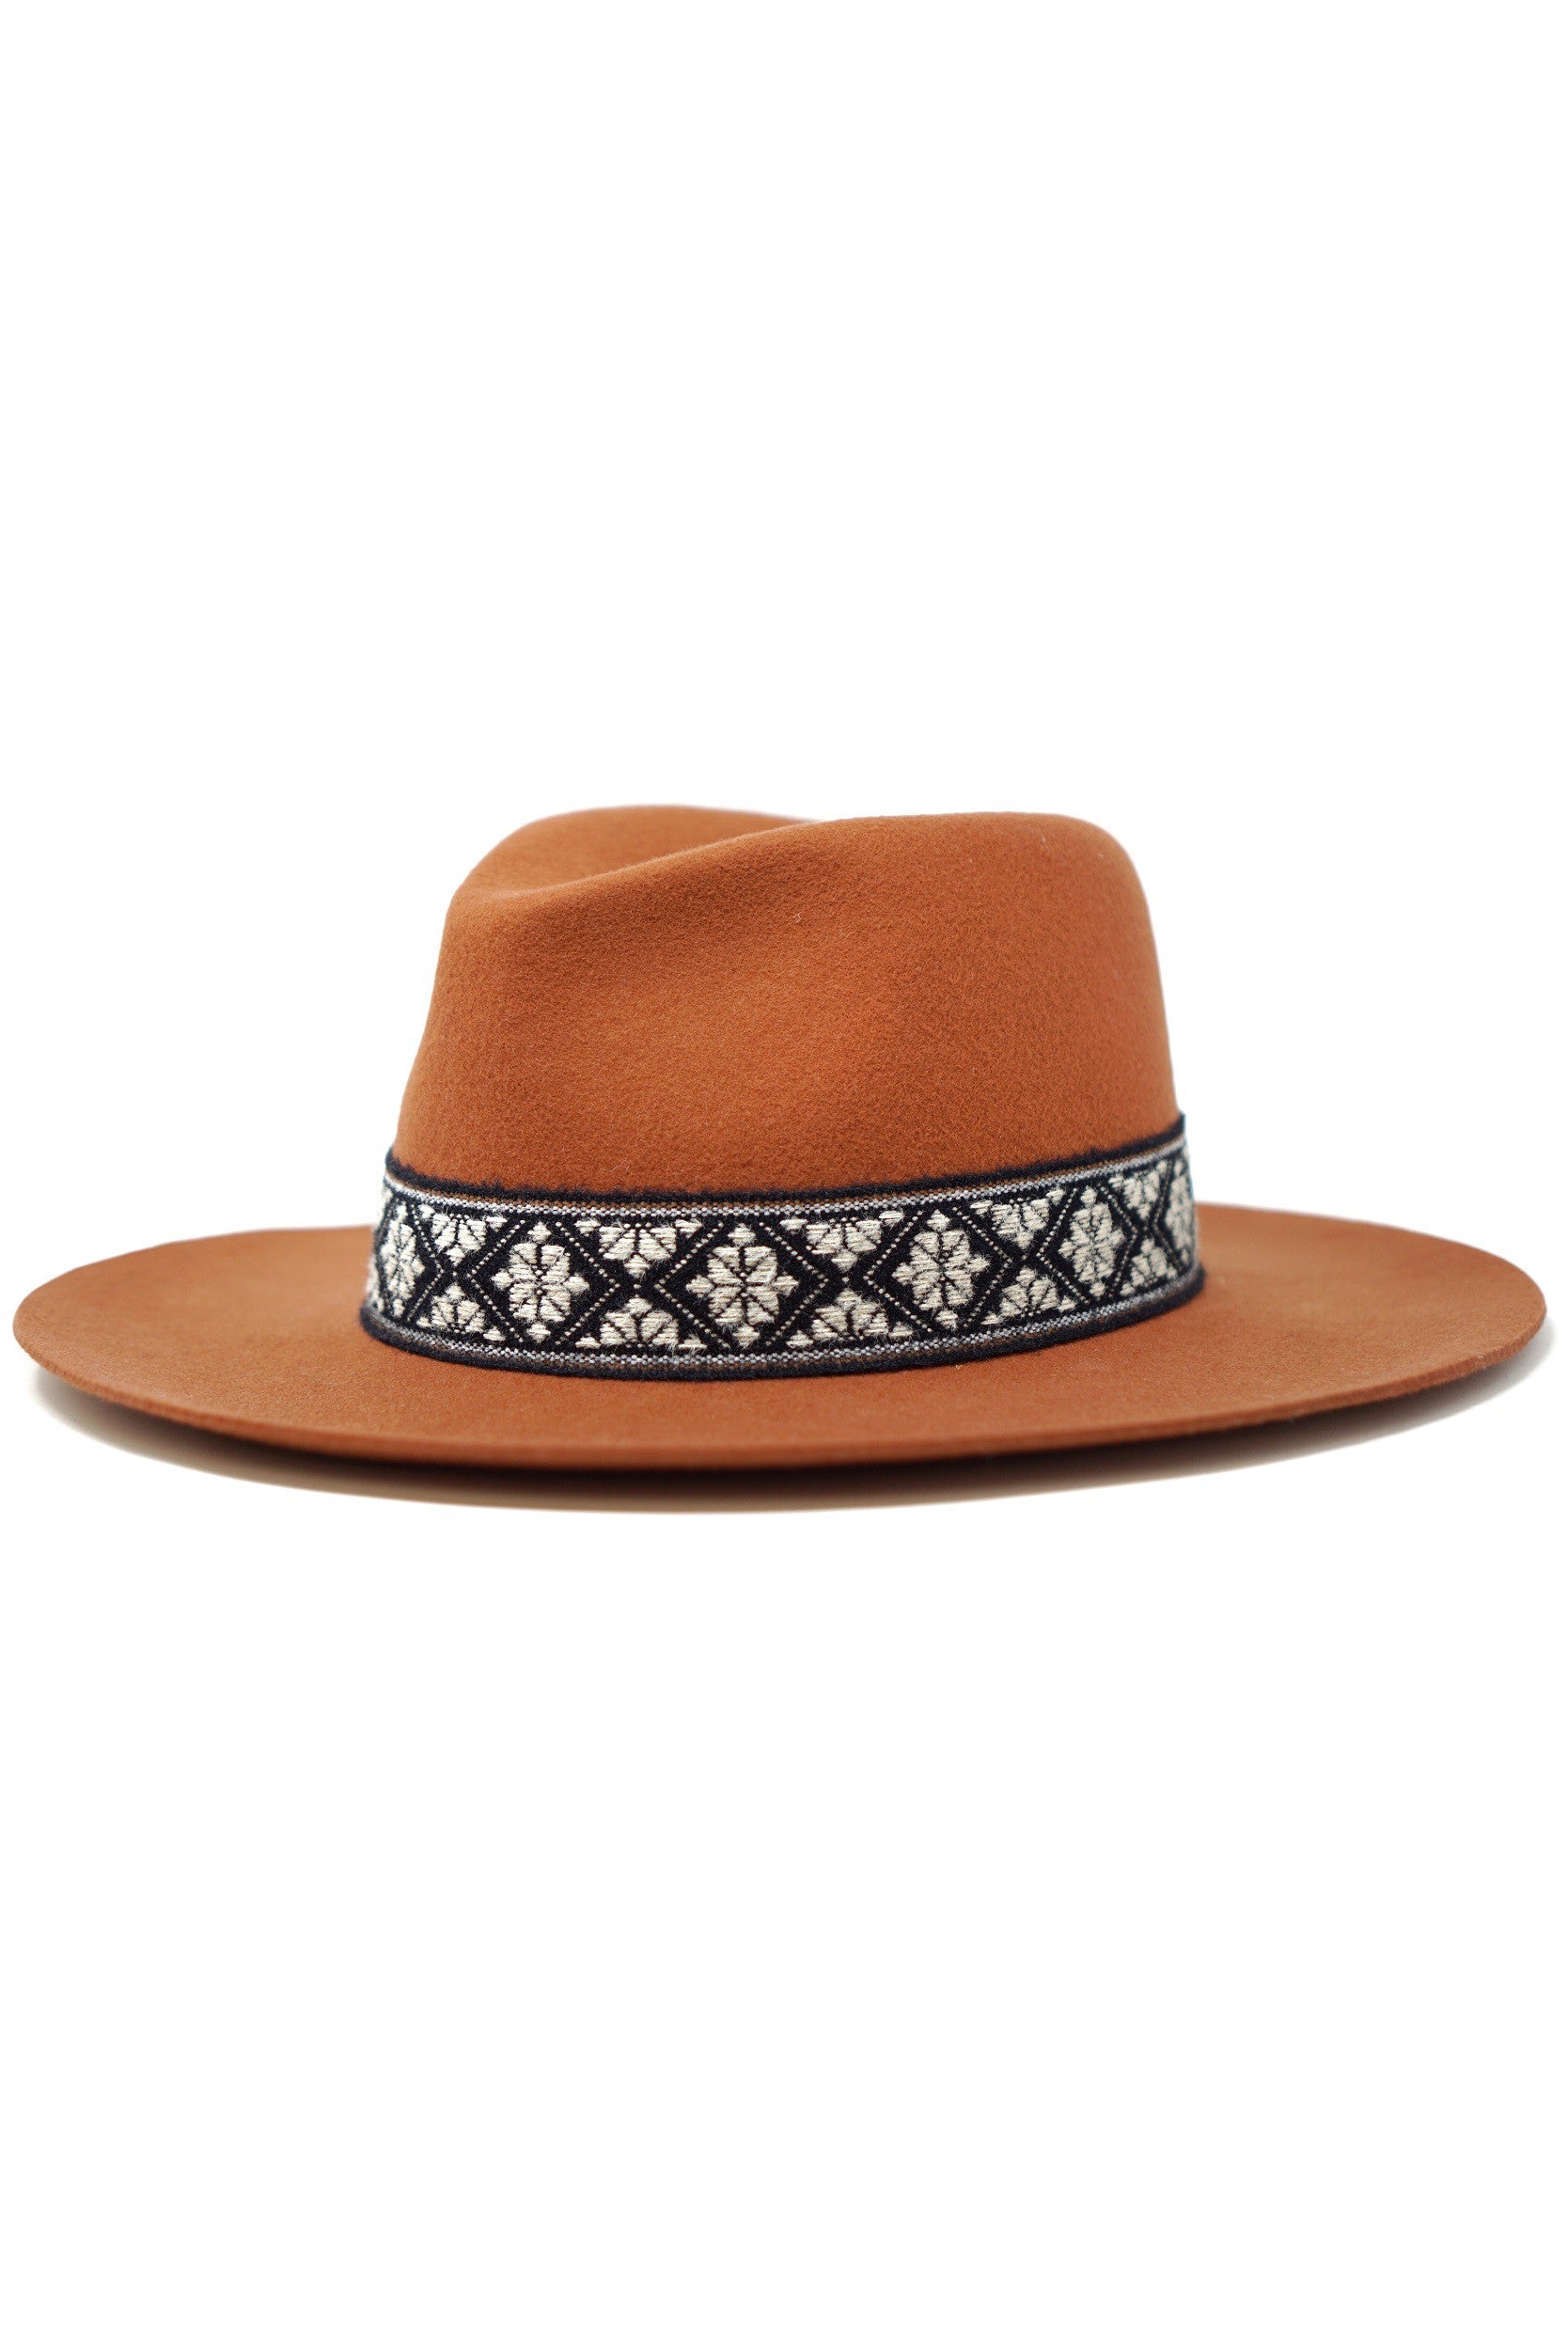 Olive & Pique -RILEY - Pinched crown fedora with jacquard band